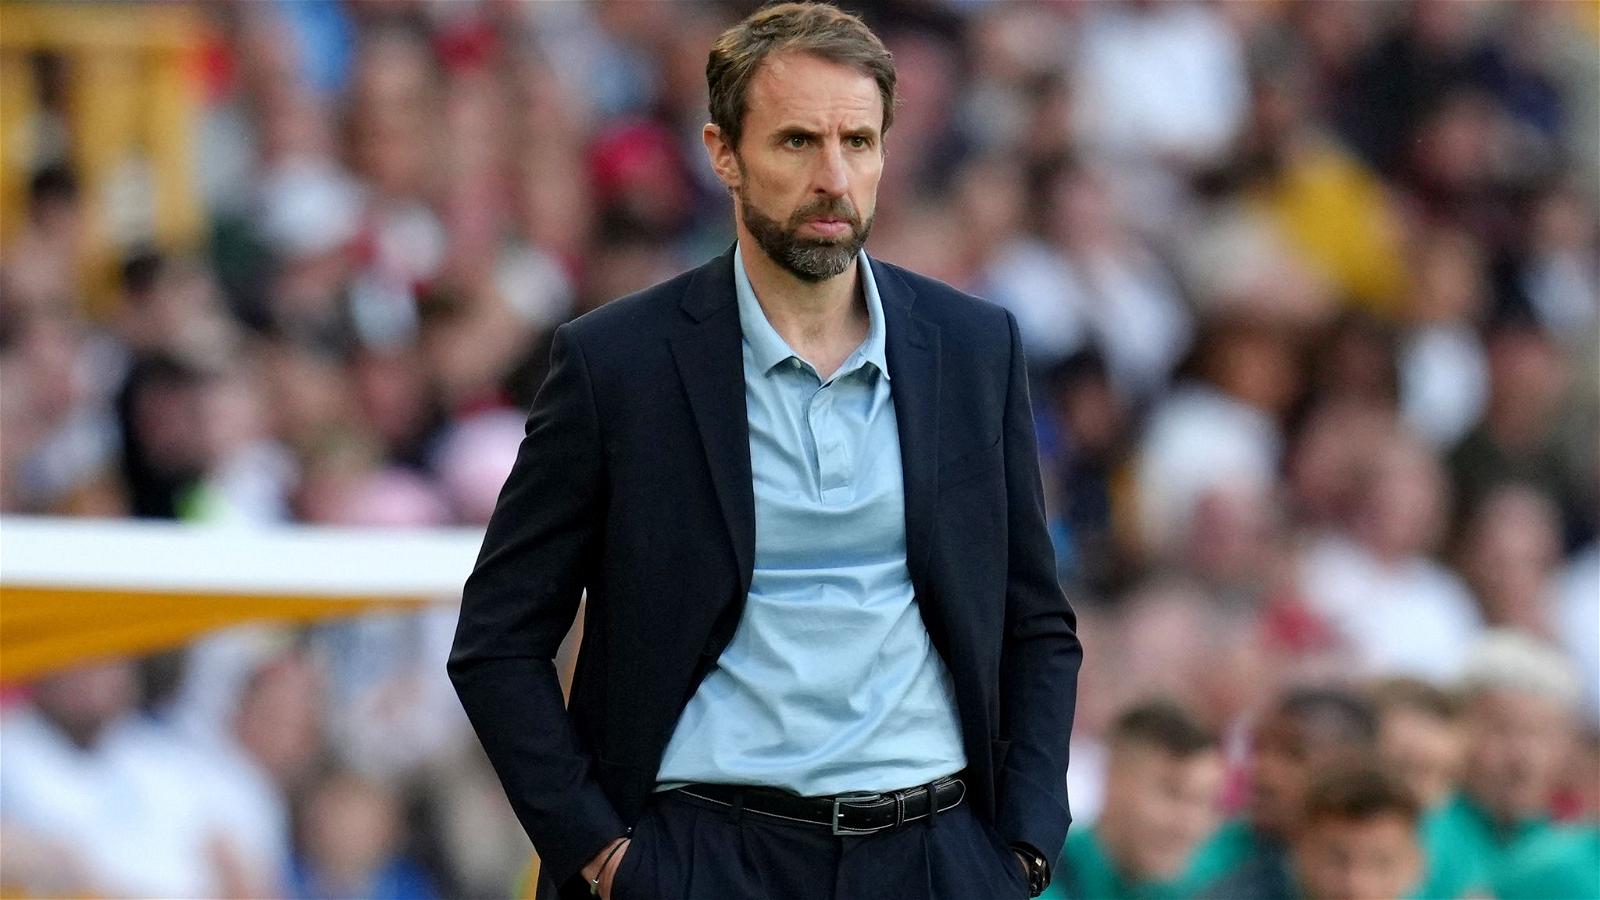 England boss Southgate won’t listen to job offers until after Euro 2024